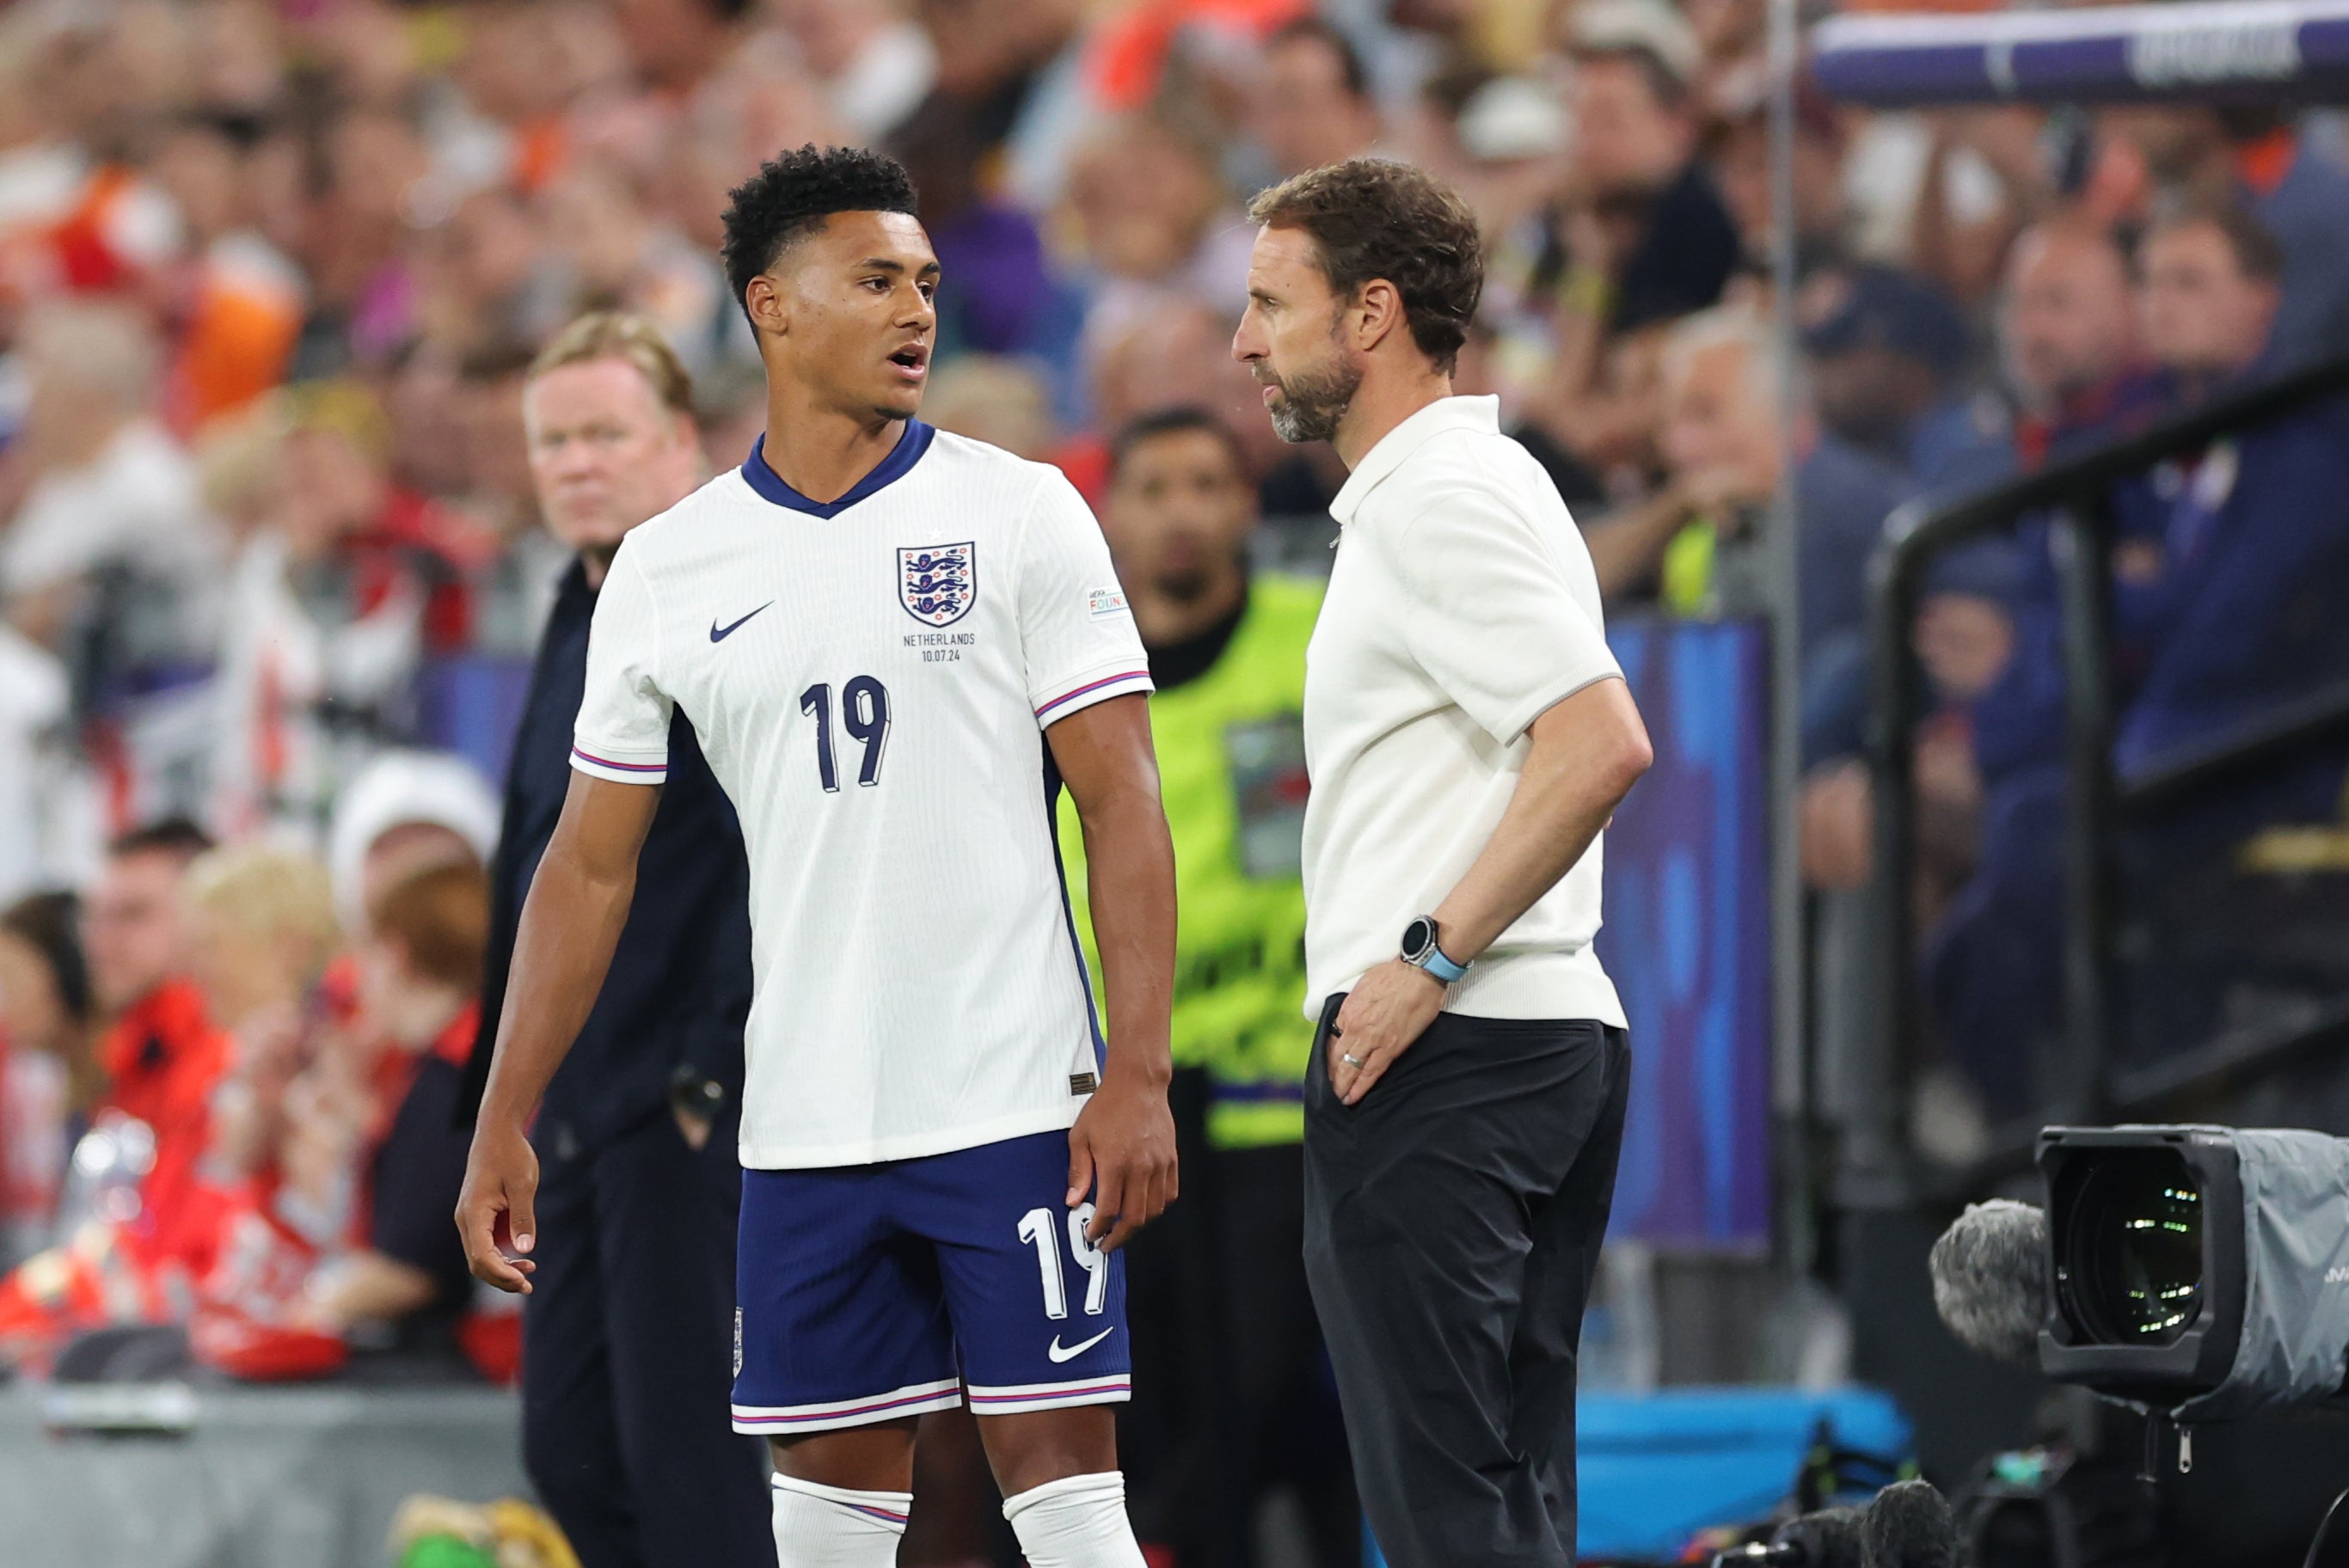 Ollie Watkins came off the bench to score the winner in the semi-finals against Netherlands